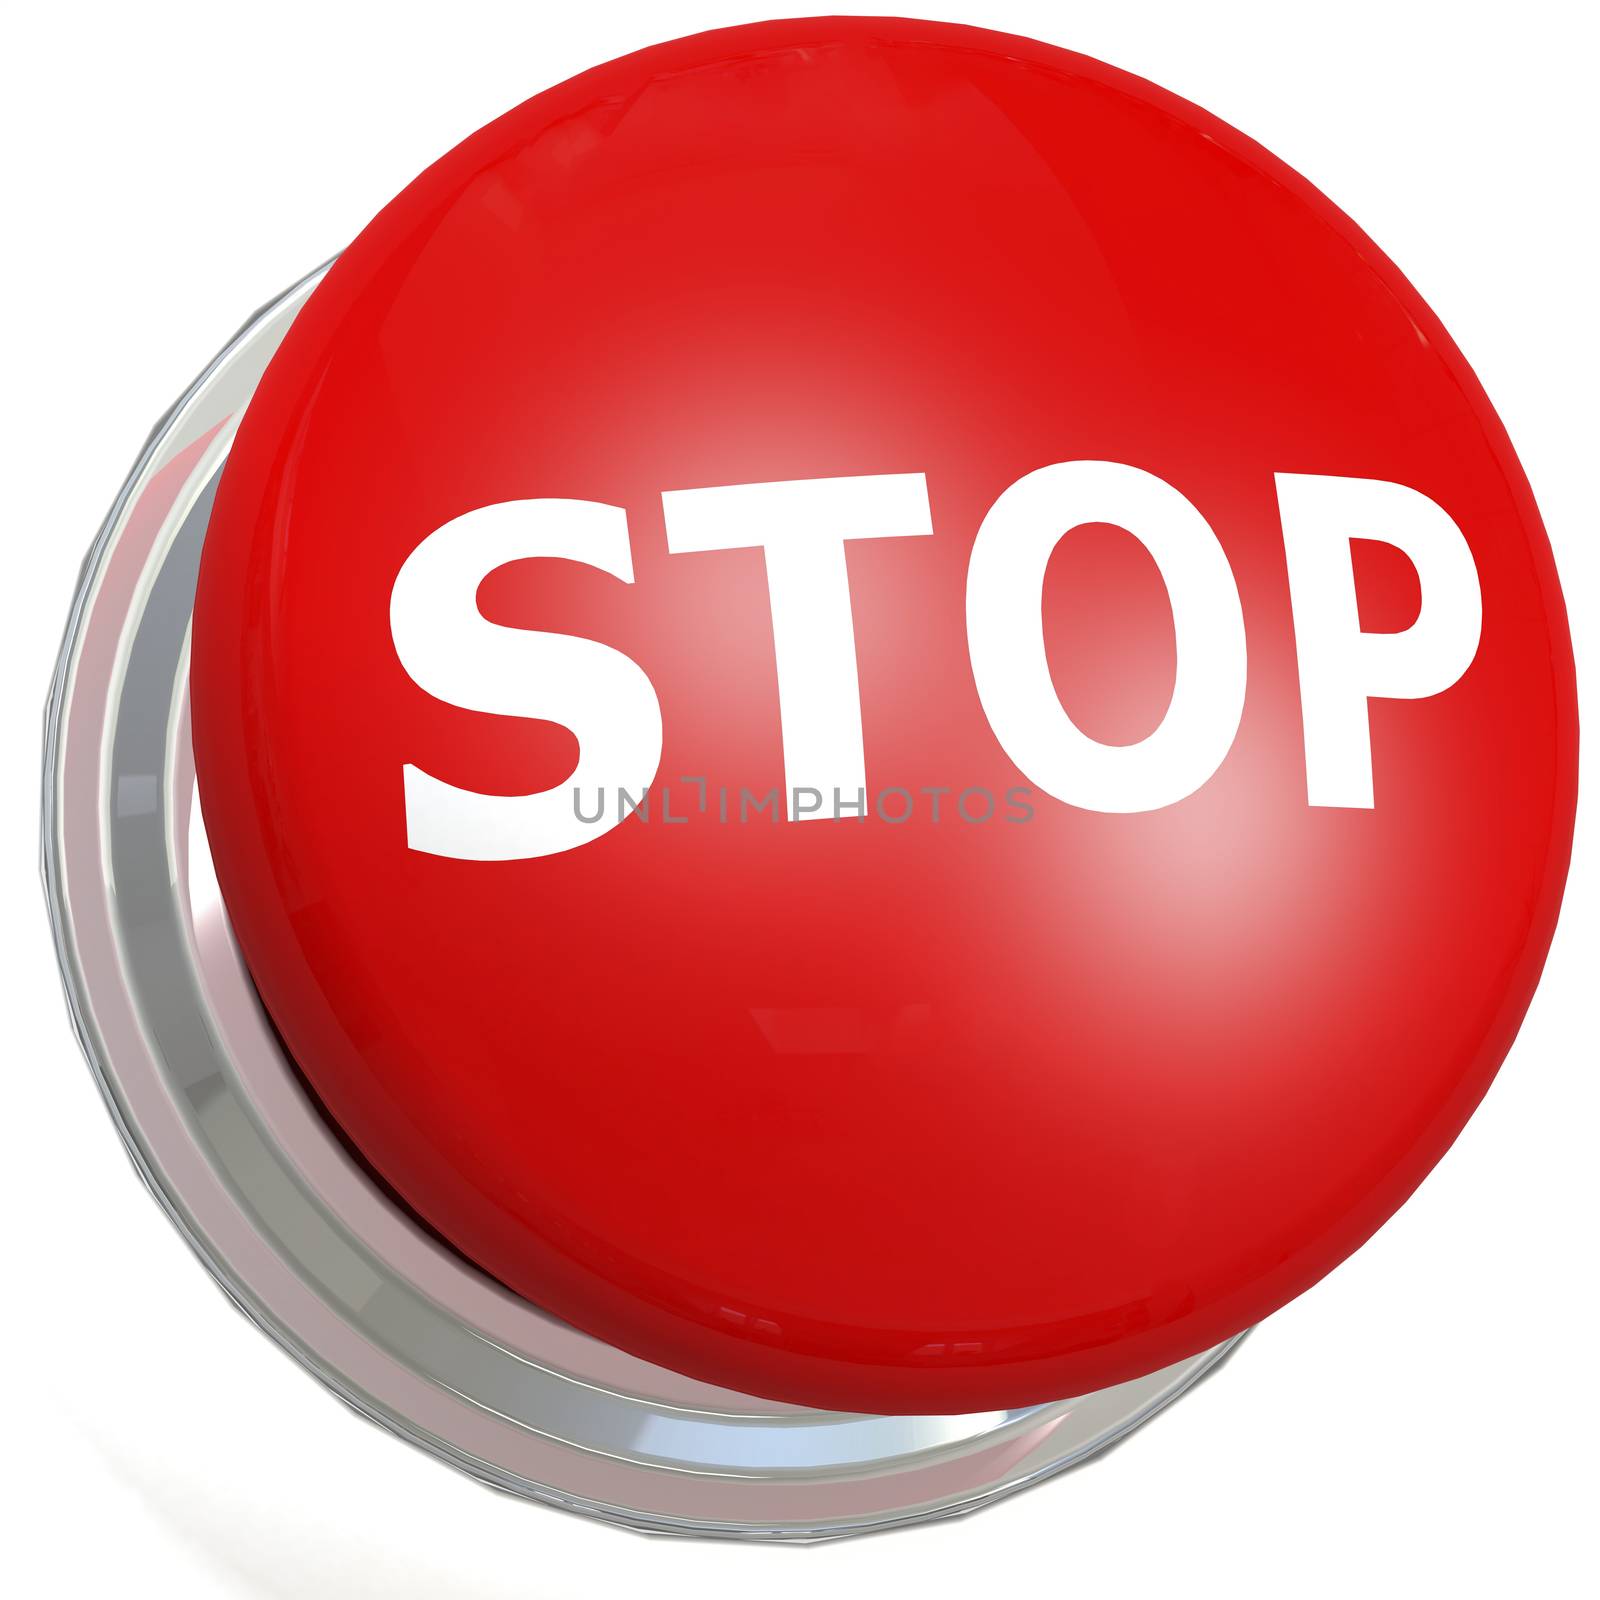 Red stop button with metal ring, 3D rendering